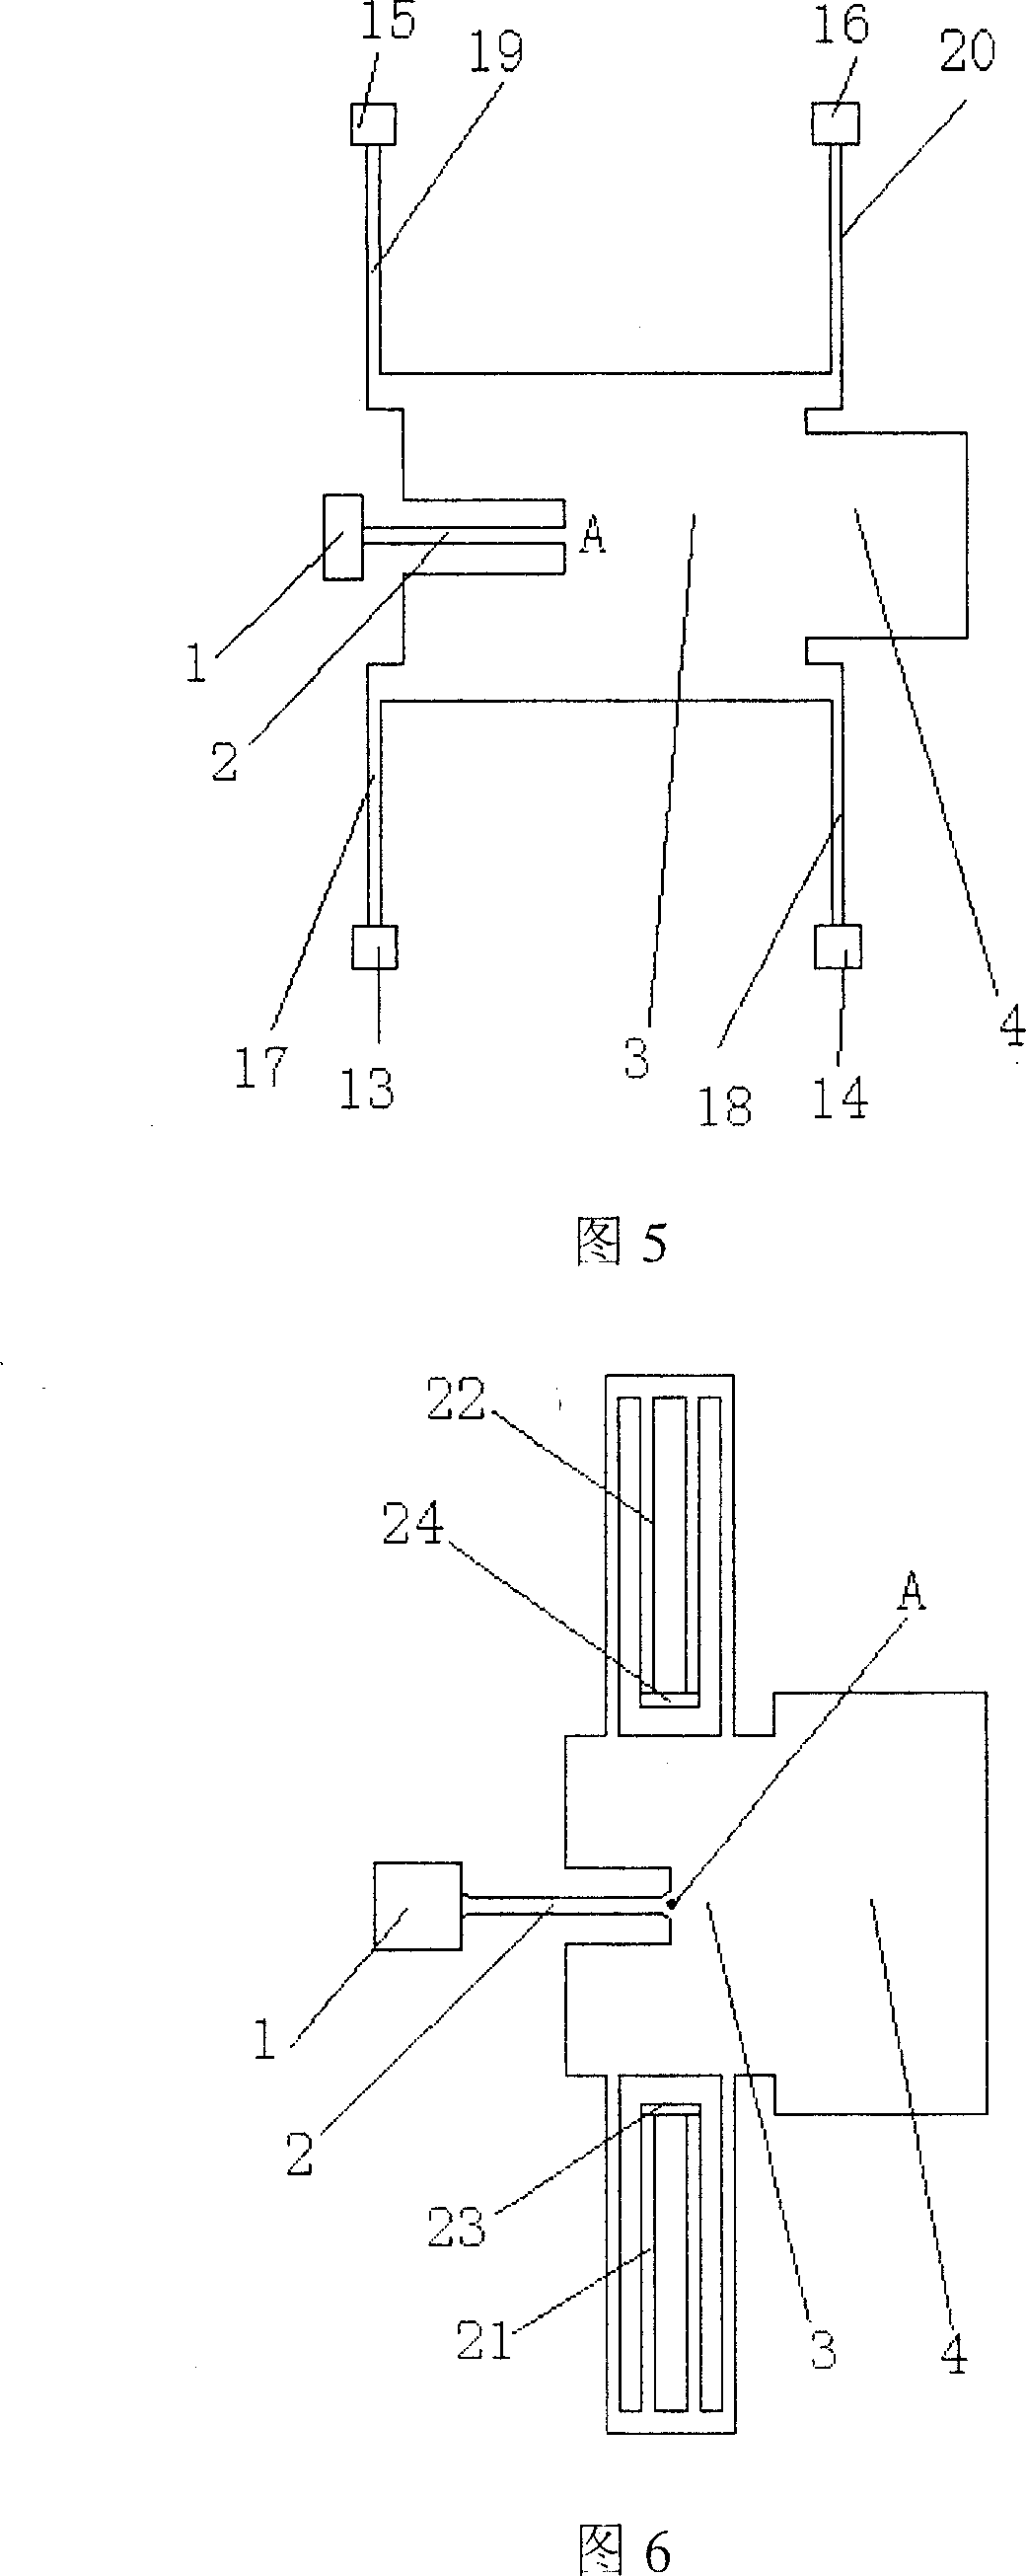 Micro-stretching sample structure with elastic beam